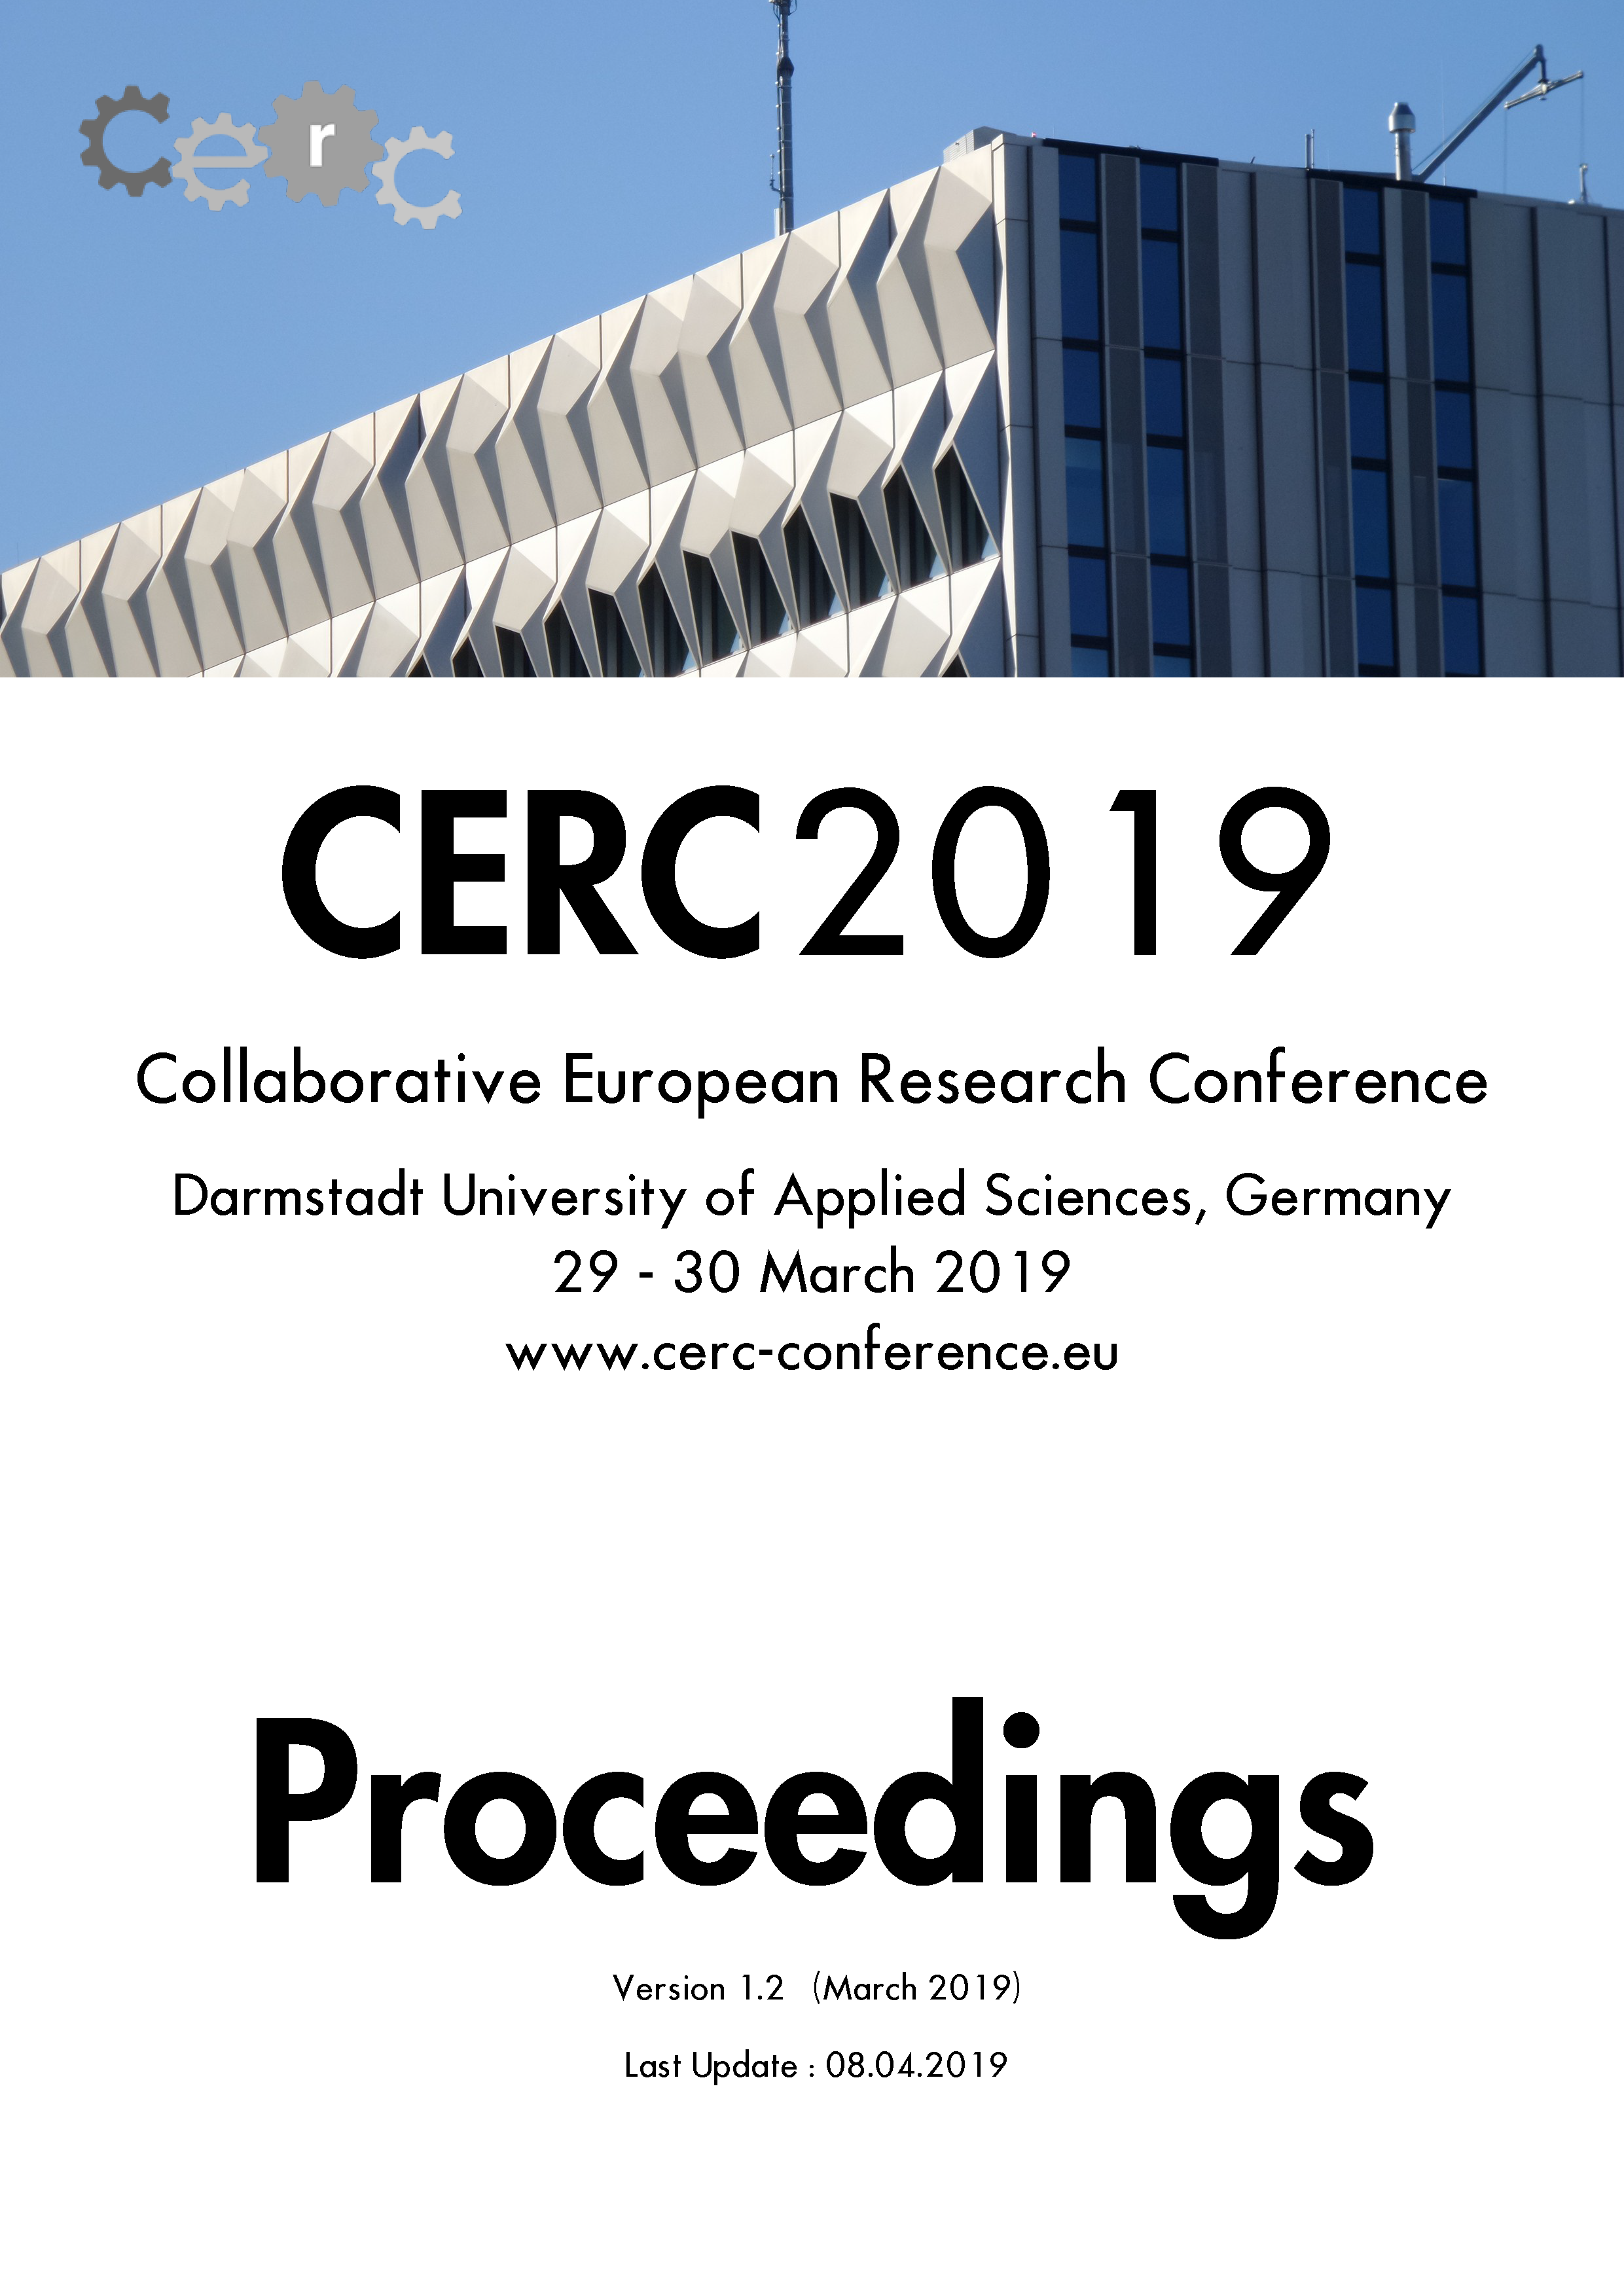 Proceedings of the 5th Collaborative European Research Conference (CERC 2019)